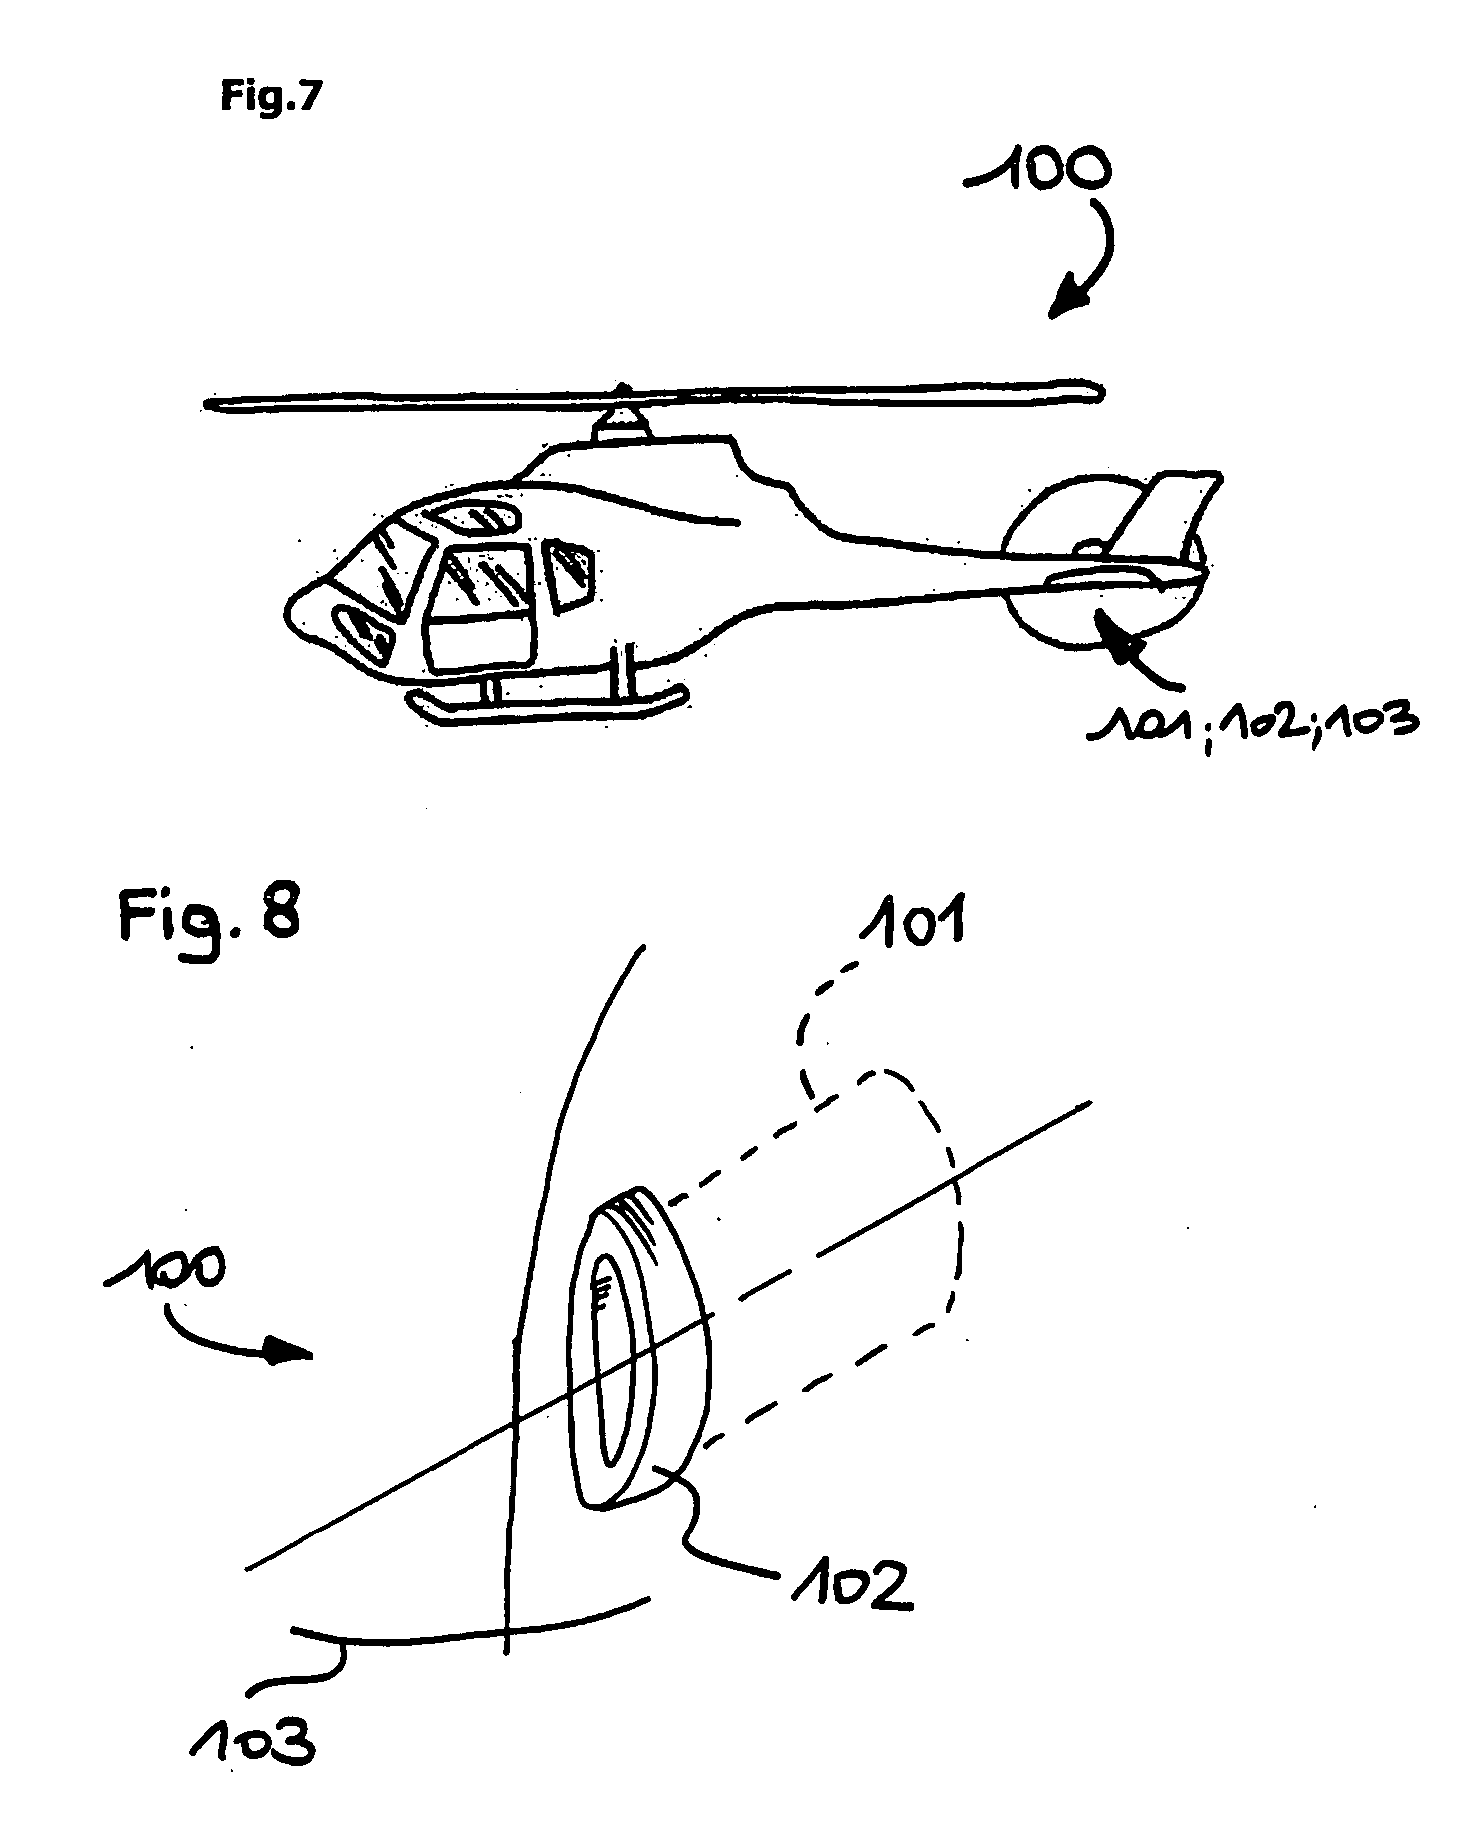 Composite protection for revealing damage to a core in a vehicle such as an aircraft